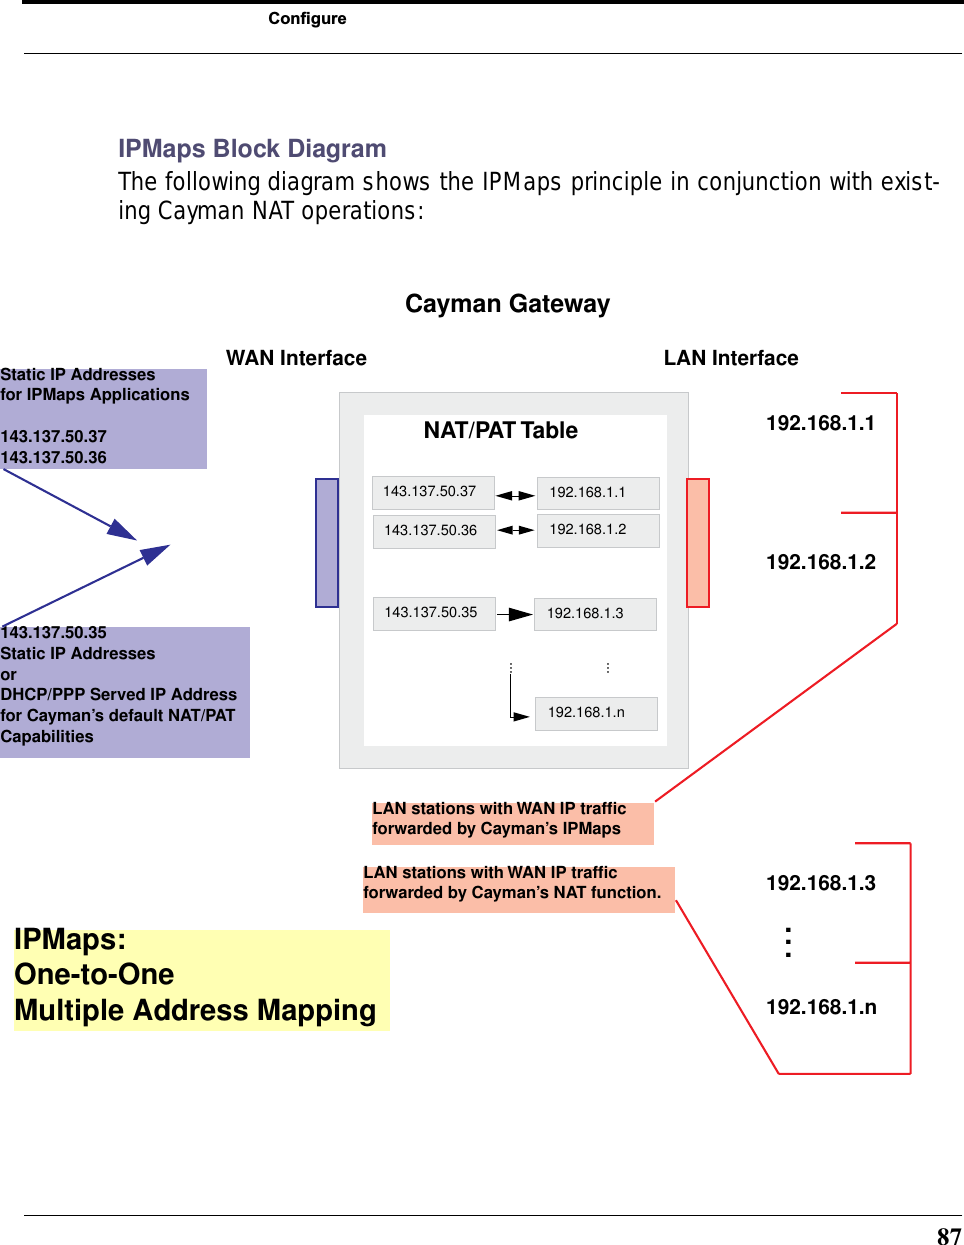 87ConfigureIPMaps Block DiagramThe following diagram shows the IPMaps principle in conjunction with exist-ing Cayman NAT operations:NAT/PAT Table143.137.50.37143.137.50.36143.137.50.35192.168.1.1192.168.1.n192.168.1.3192.168.1.2......Cayman GatewayStatic IP Addressesfor IPMaps Applications143.137.50.37143.137.50.36143.137.50.35Static IP AddressesorDHCP/PPP Served IP Address for Cayman’s default NAT/PAT CapabilitiesIPMaps:One-to-OneMultiple Address MappingLAN stations with WAN IP trafﬁc forwarded by Cayman’s IPMapsLAN stations with WAN IP trafﬁc forwarded by Cayman’s NAT function.WAN Interface LAN Interface192.168.1.1192.168.1.2192.168.1.3192.168.1.n...